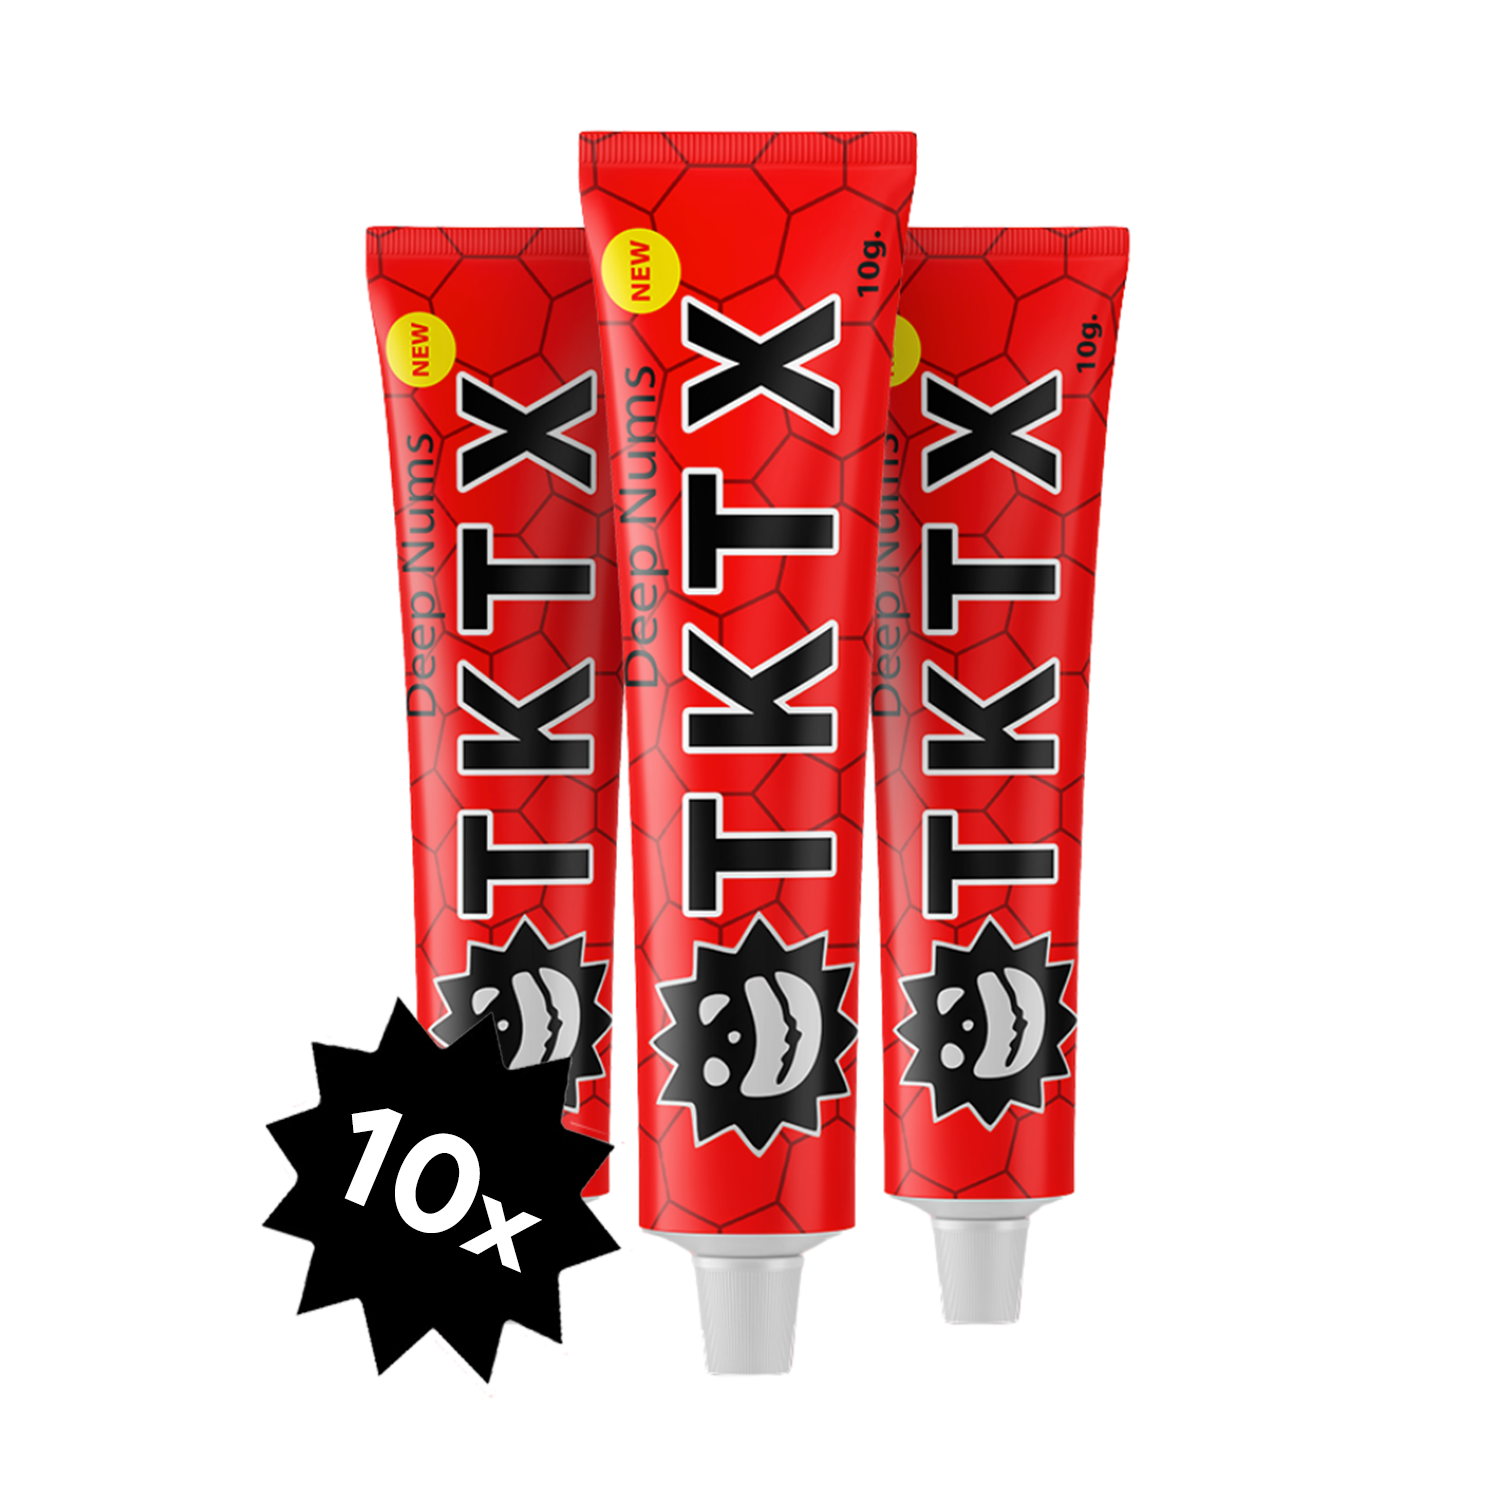 Without pain - 10x TKTX Rood